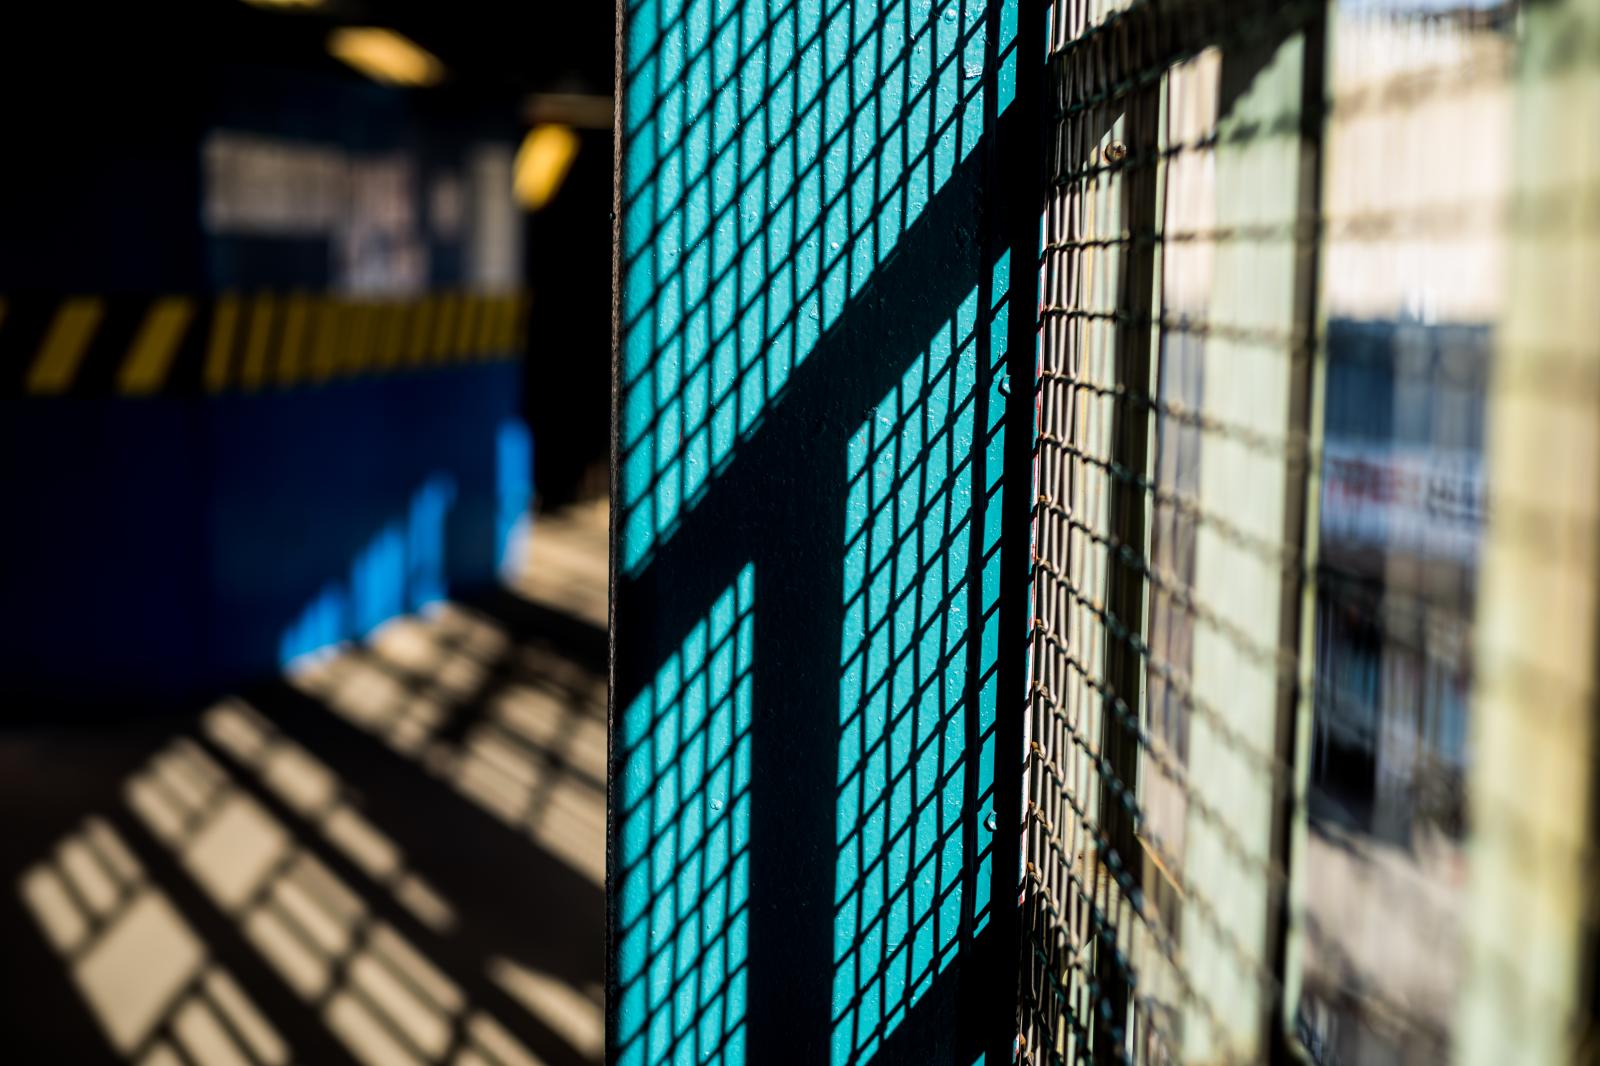 Image from Street Photography/Color Works -  Abstract Perspective  January 2021 